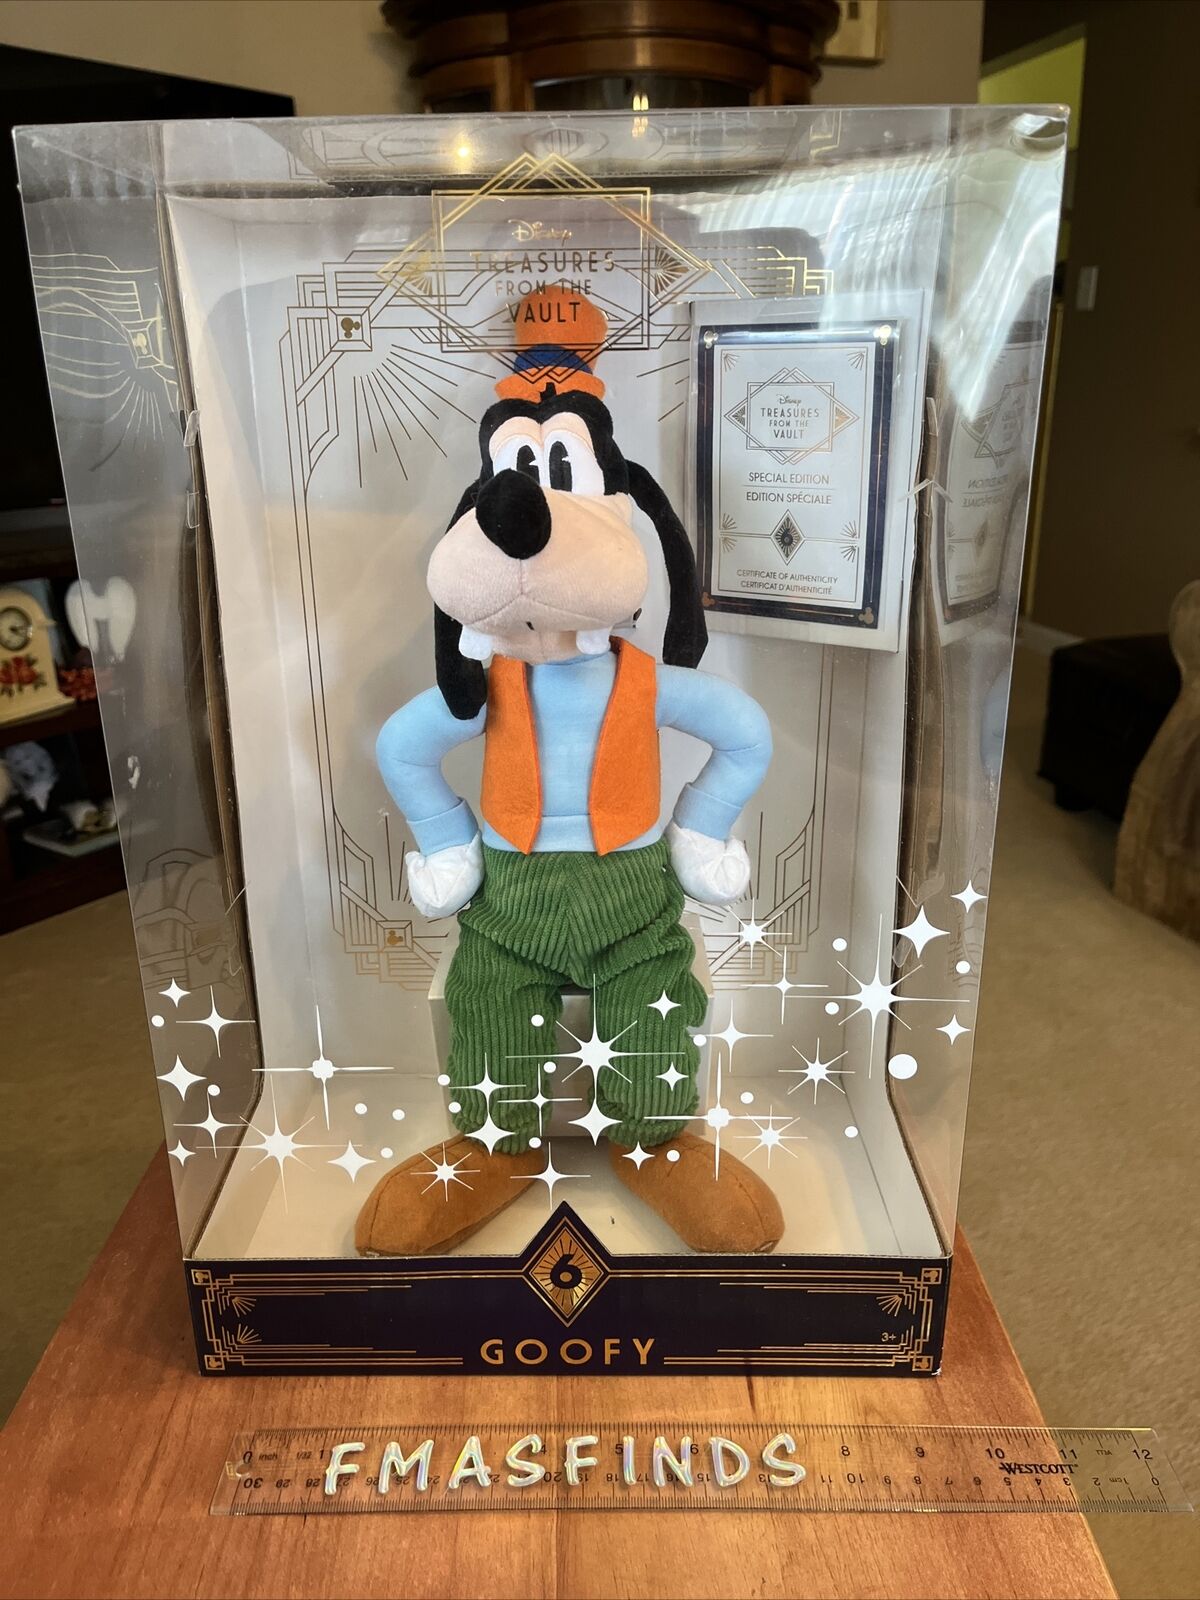 GOOFY Disney Treasures From the Vault, Limited Edition Plush NEW IN BOX